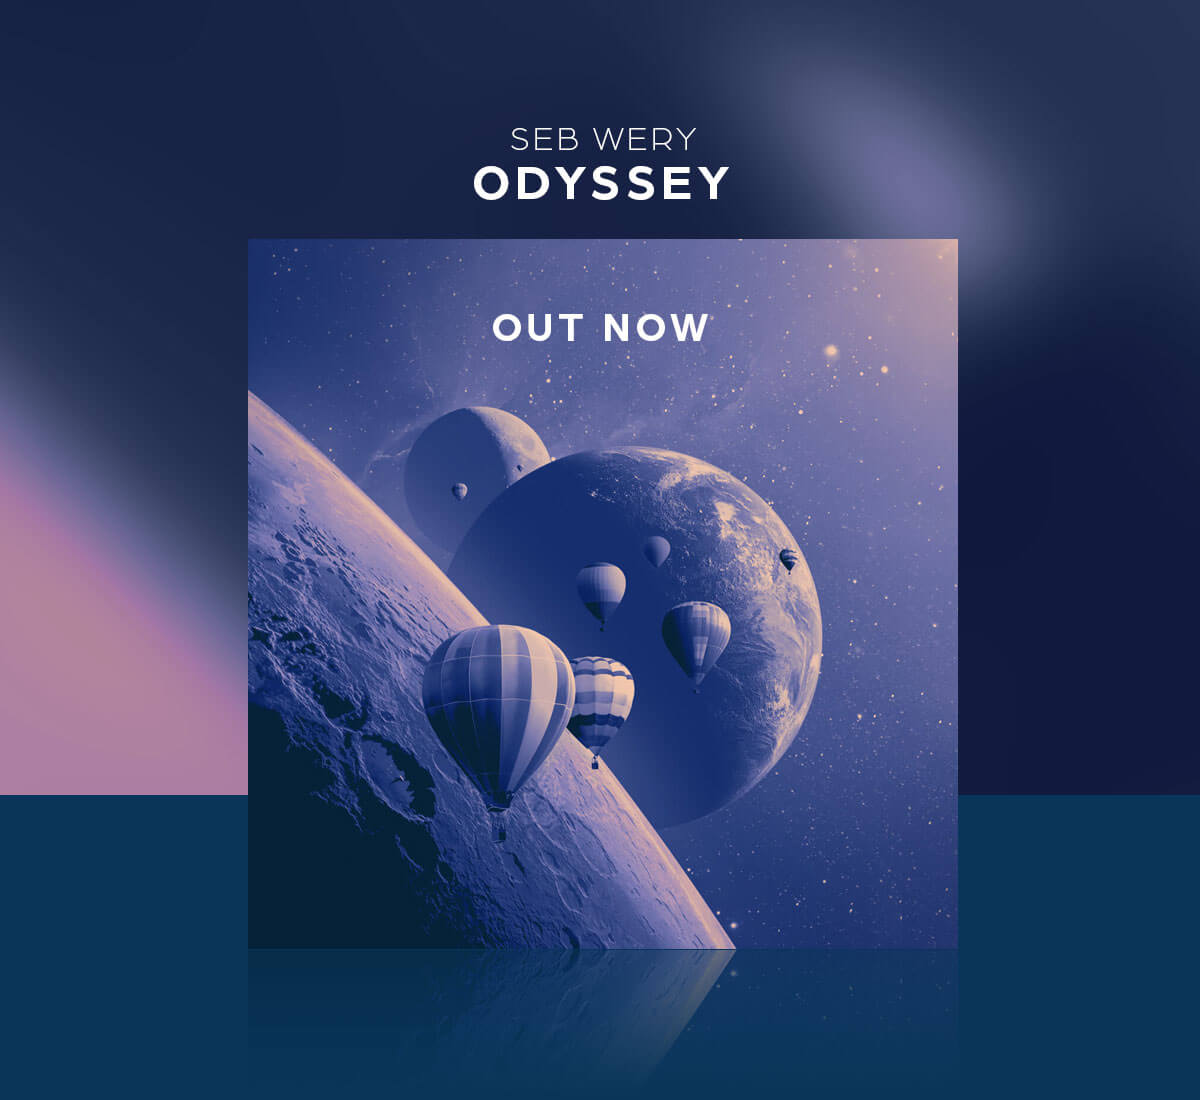 Odyssey is Out Now!